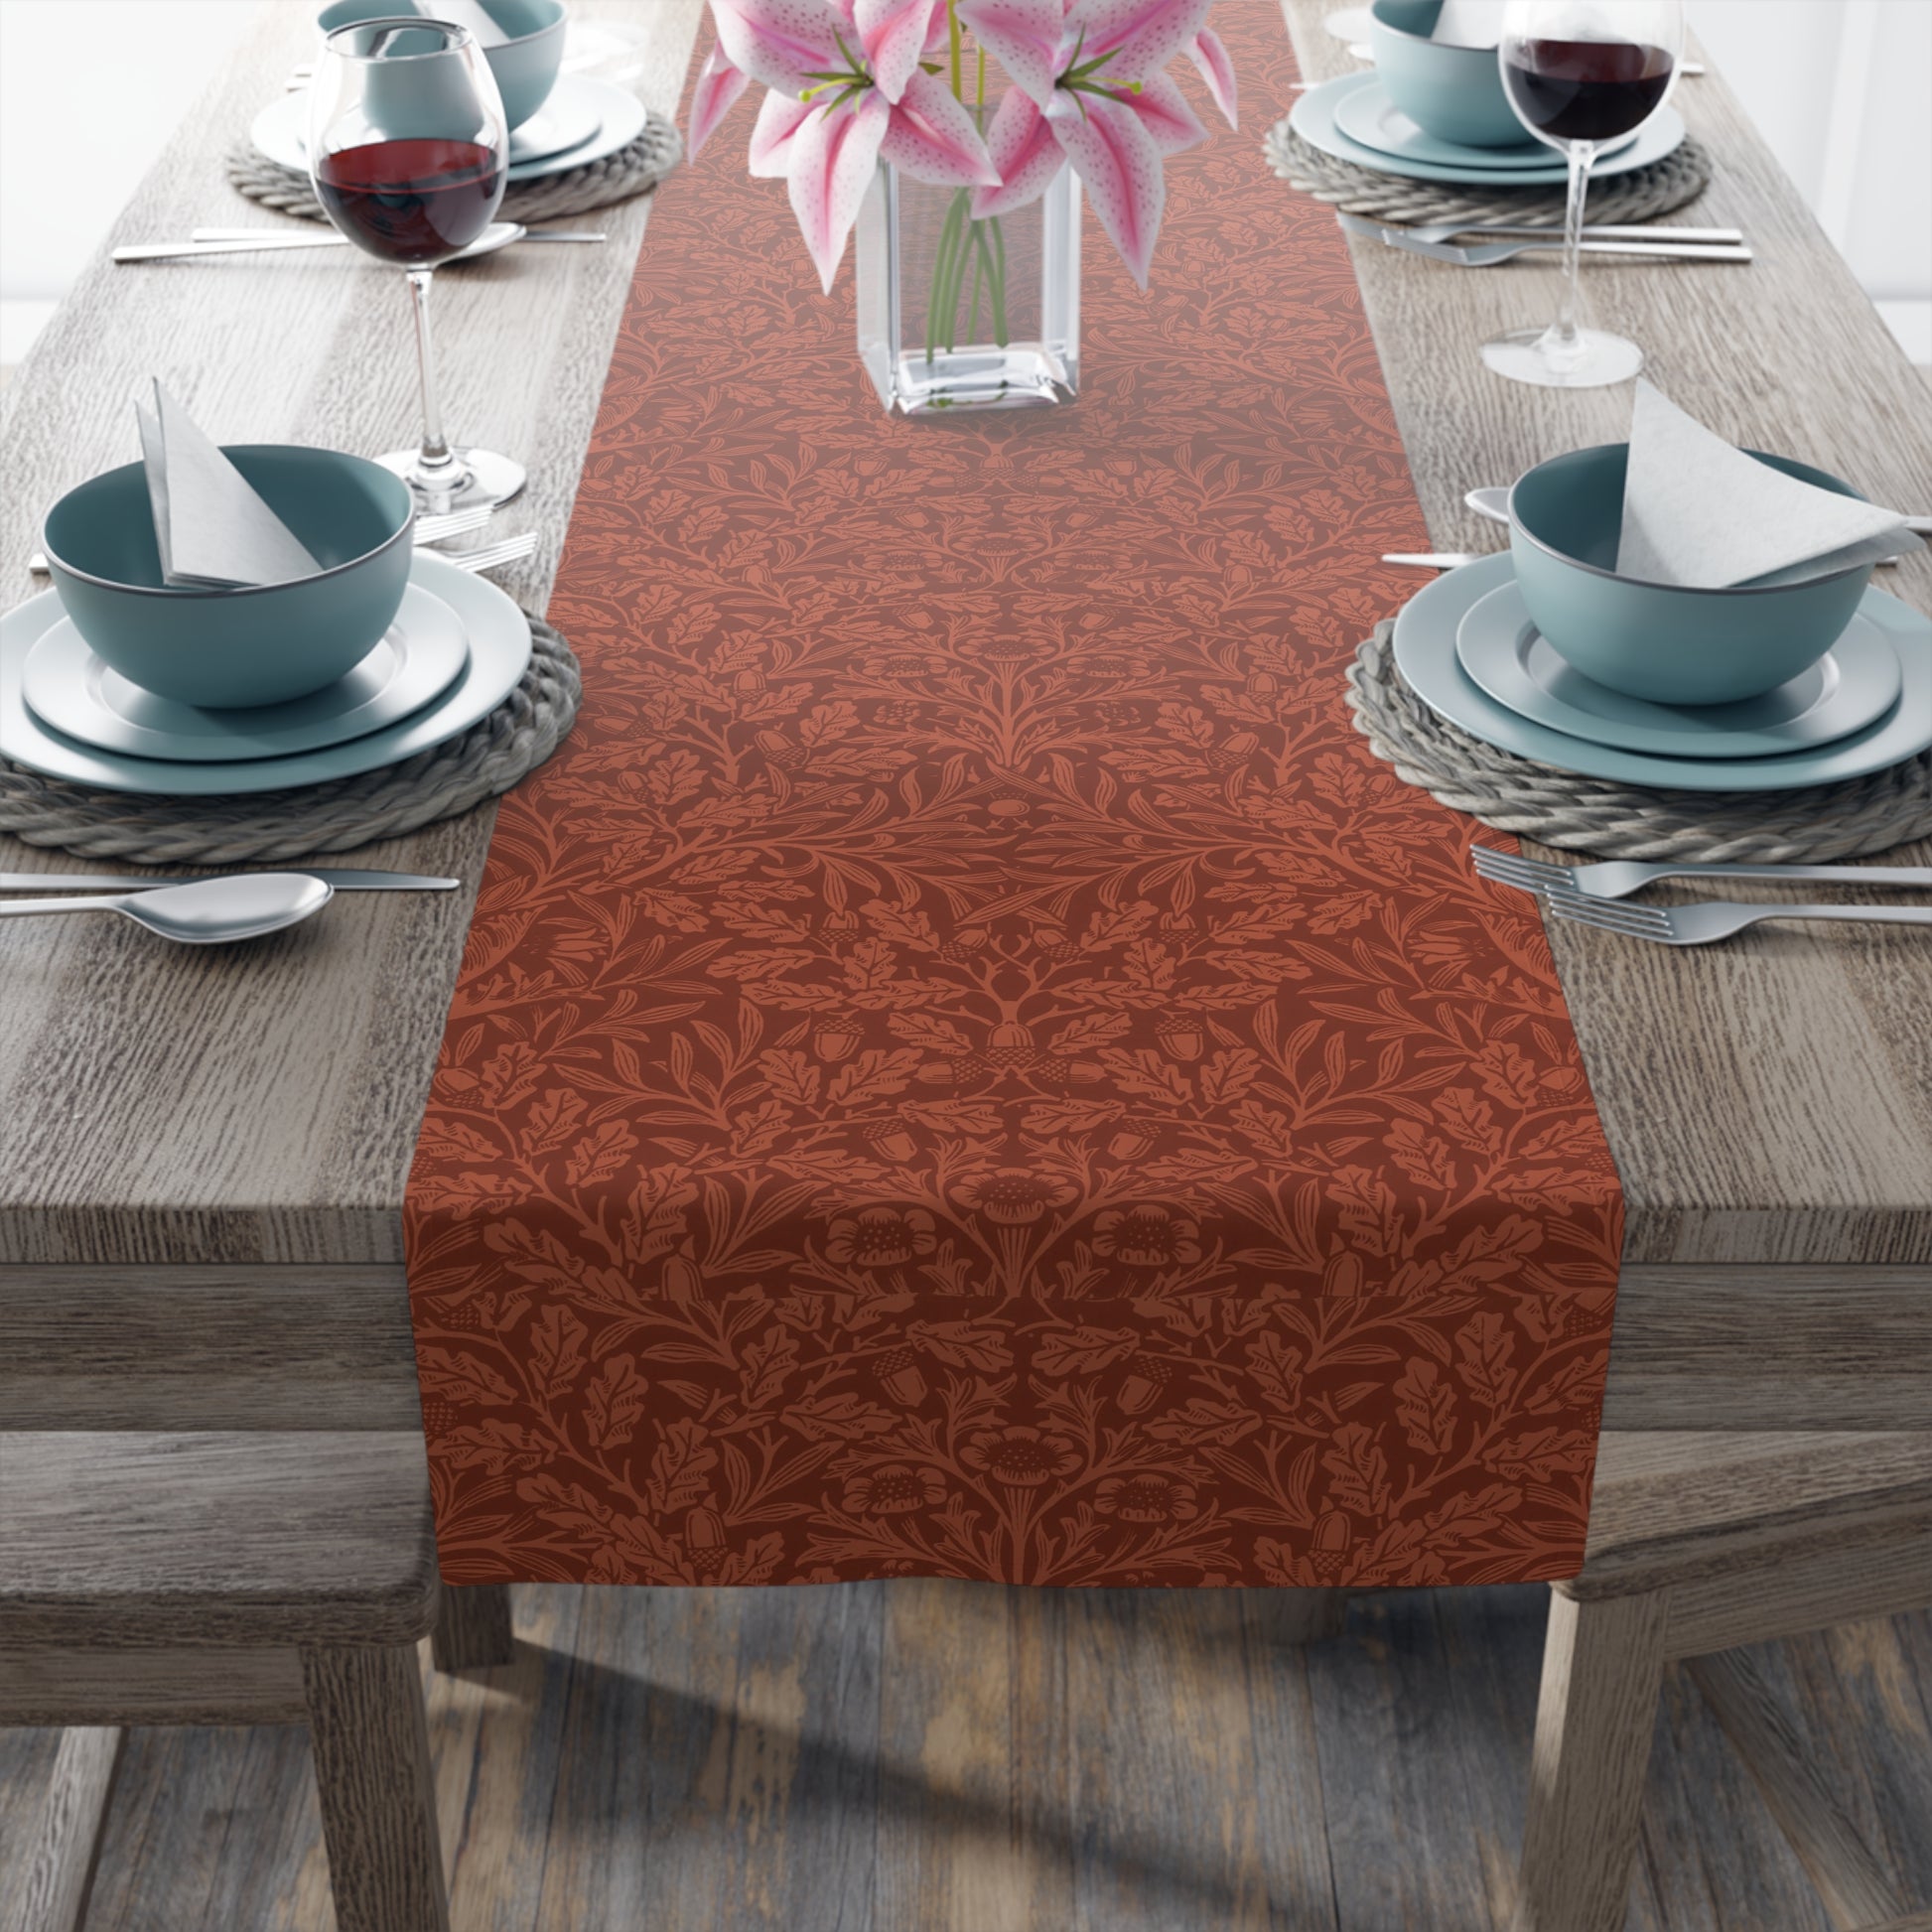 william-morris-co-table-runner-acorns-and-oak-leaves-collection-rust-3